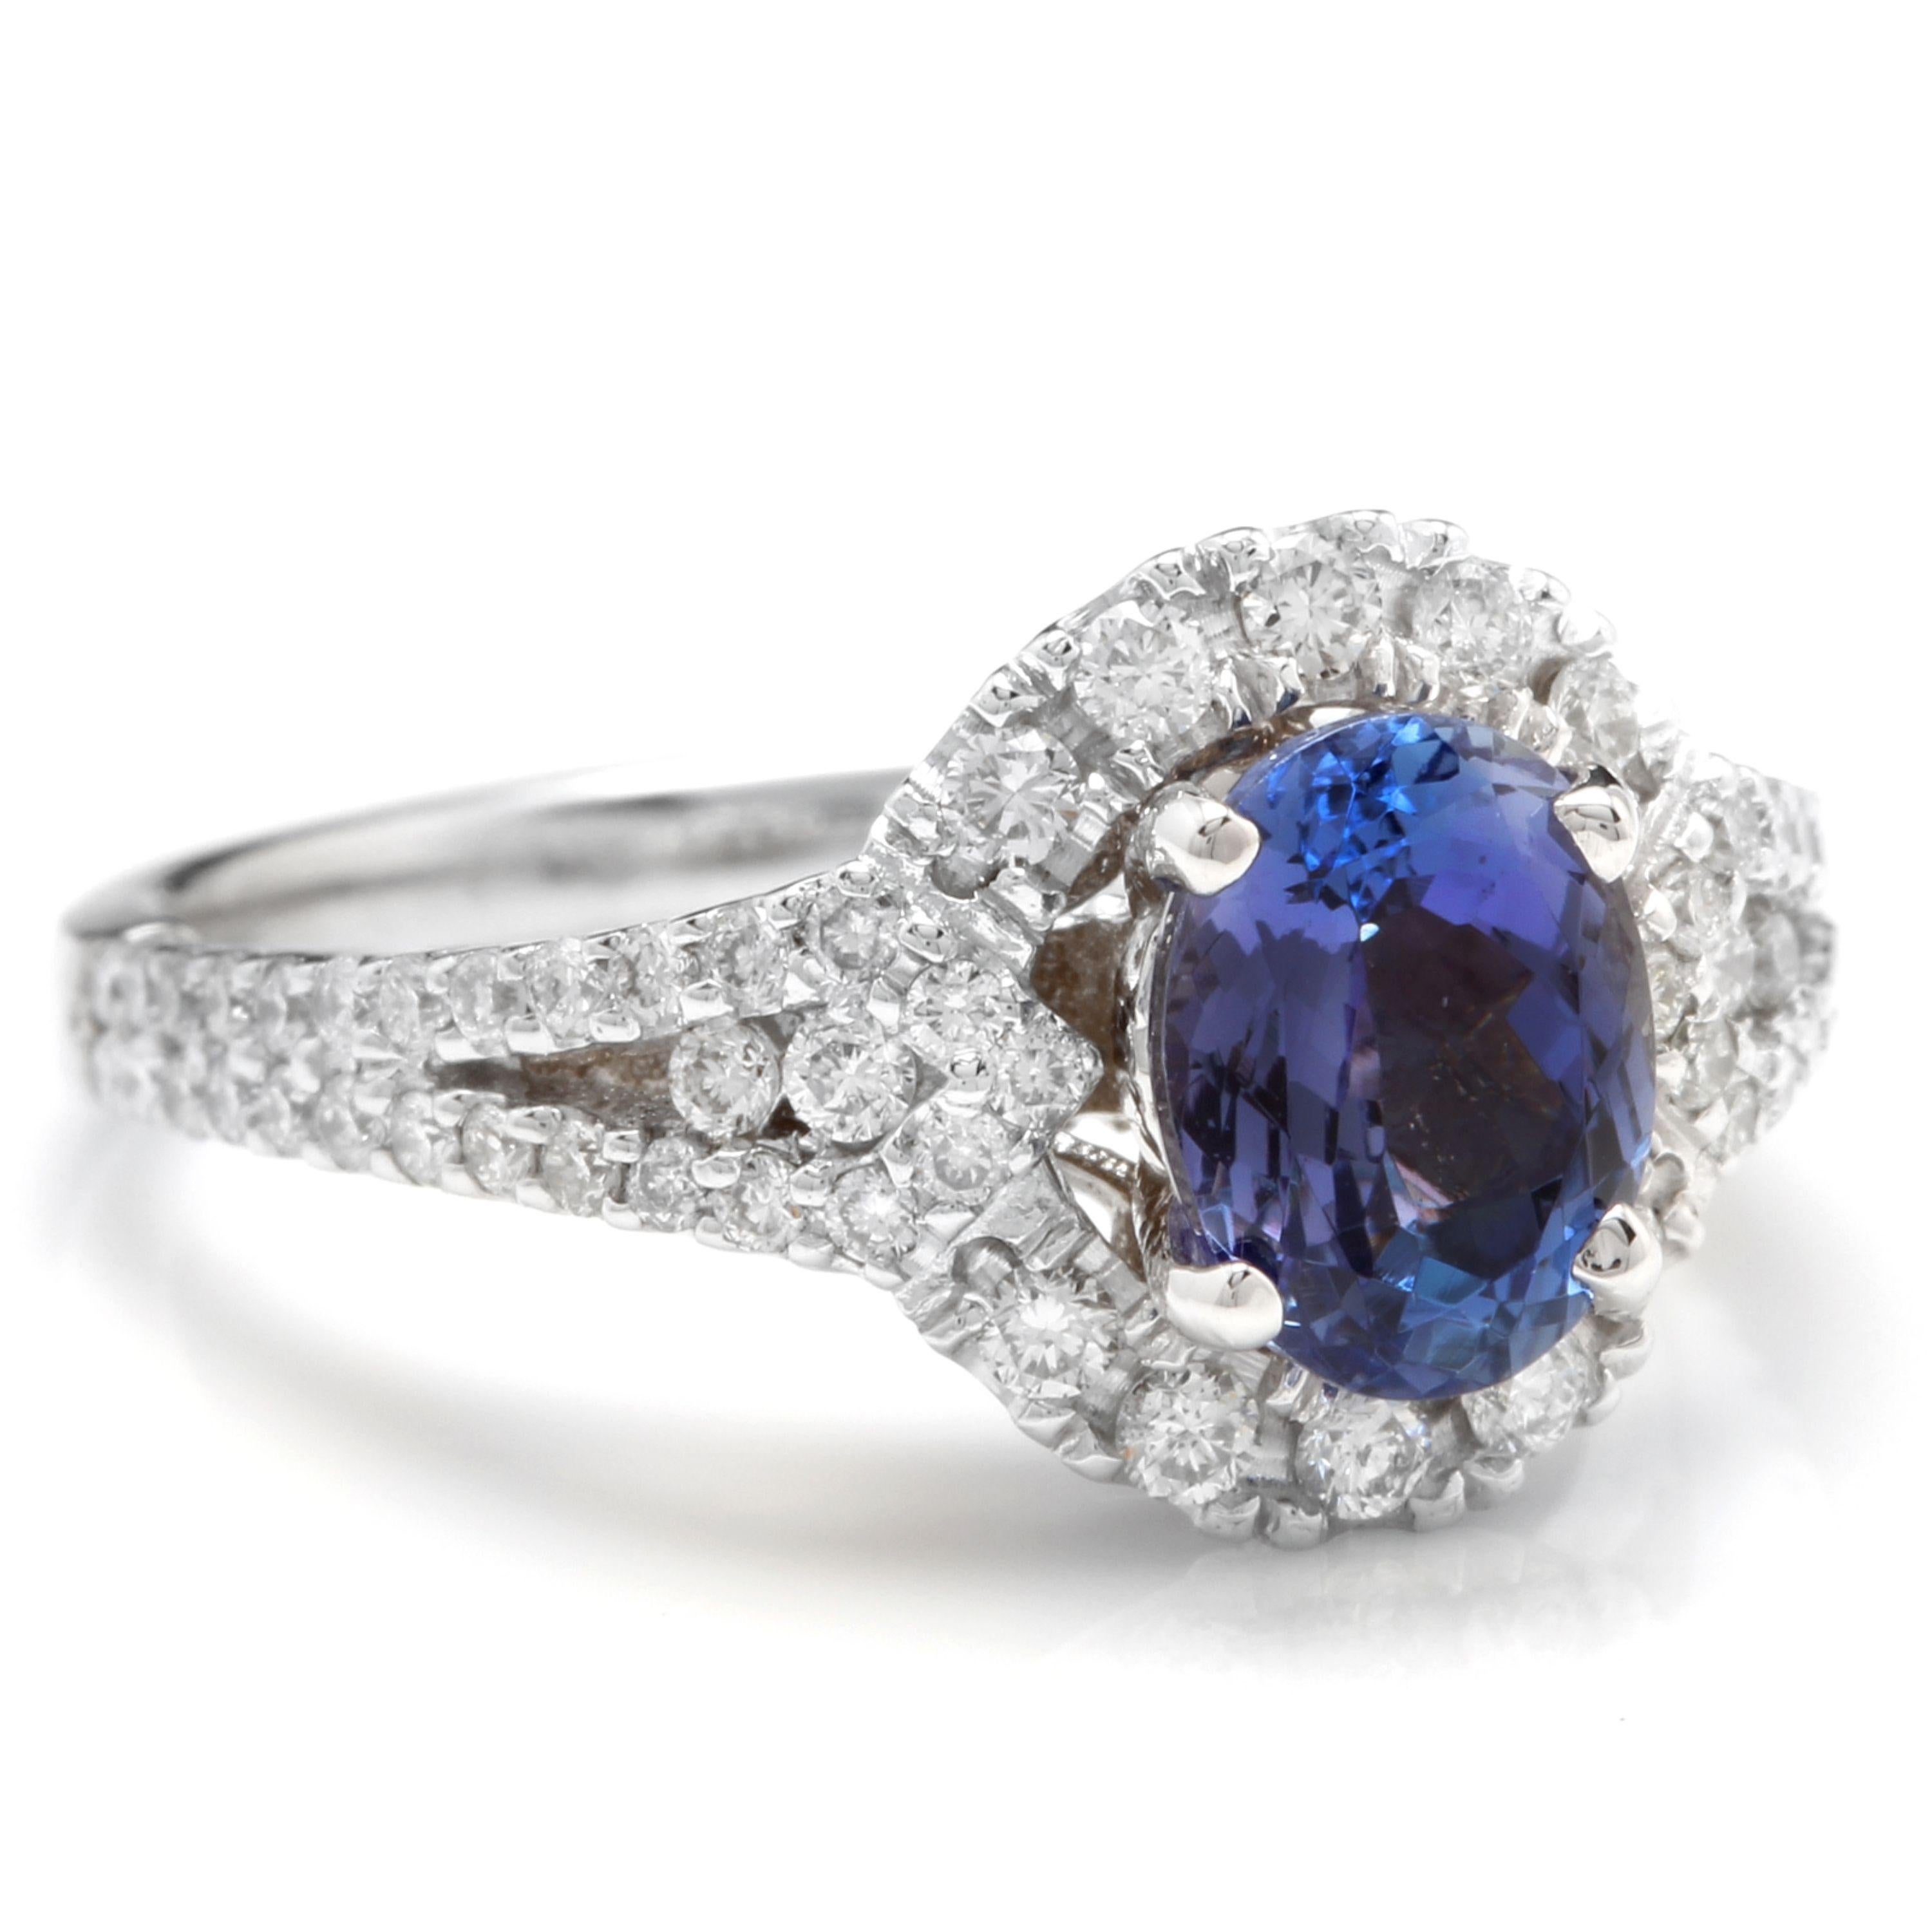 2.50 Carats Natural Very Nice Looking Tanzanite and Diamond 14K Solid White Gold Ring

Total Natural Oval Cut Tanzanite Weight is: Approx. 1.70 Carats

Tanzanite Measures: Approx. 8.00 x 6.00mm

Natural Round Diamonds Weight: Approx. 0.80 Carats